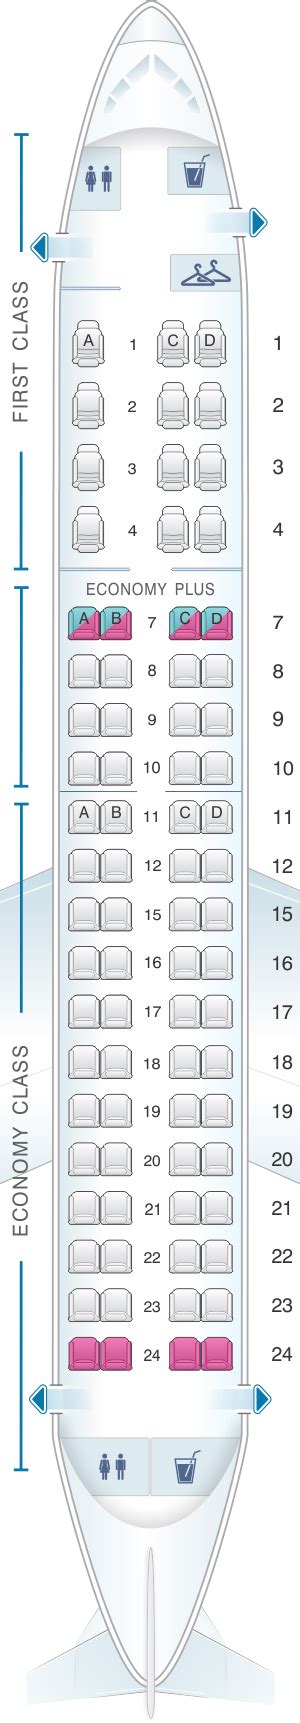 Our picks: rows 1 and 6. Caution: several rows have slightly misaligned windows due to window spacing. Operated by SkyWest, the Embraer 175 is Alaska's best regional jet experience, offering a first class cabin with in-seat power. It also features their widest economy seat at 18.25 inches, which helps make this regional jet feel a bit less ...